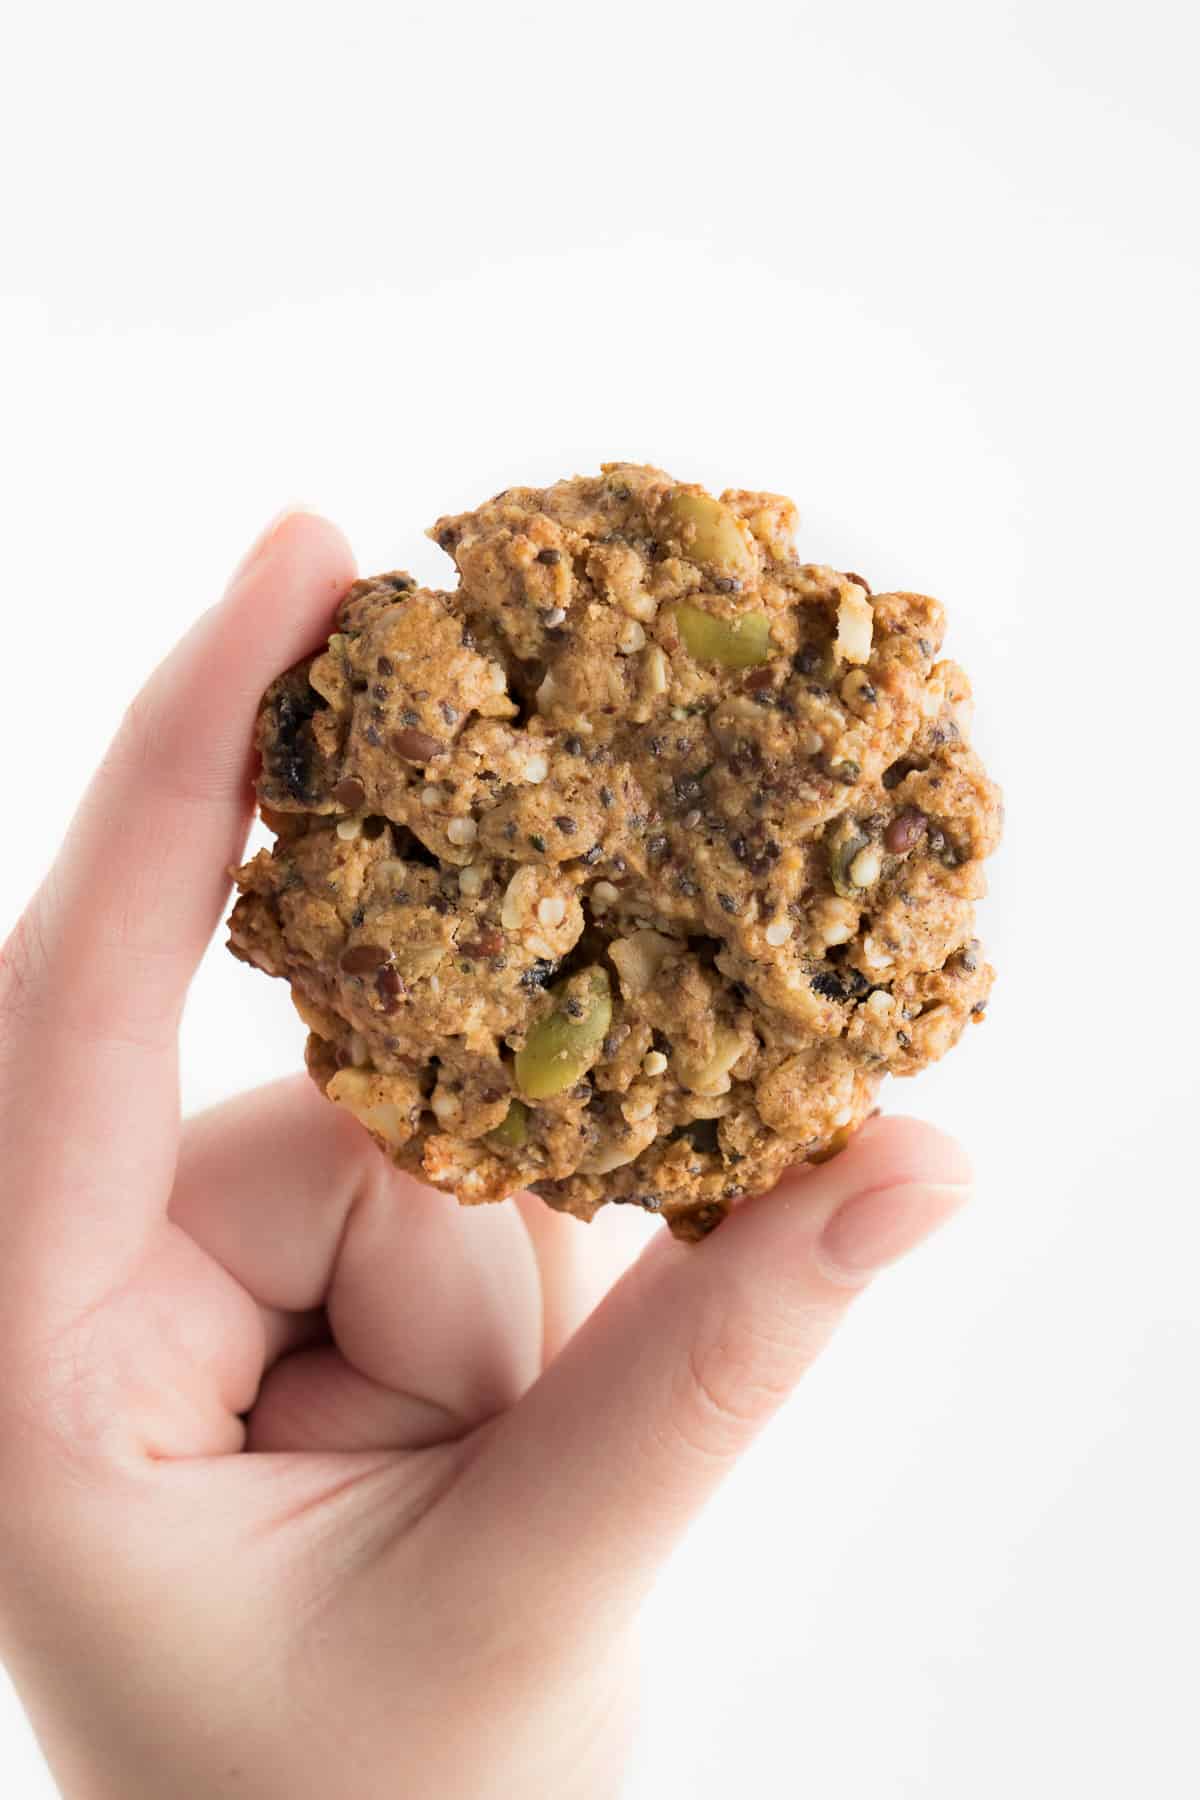 hand holding a vegan superfood breakfast cookie filled with pumpkin seeds, chia seeds, and cranberries